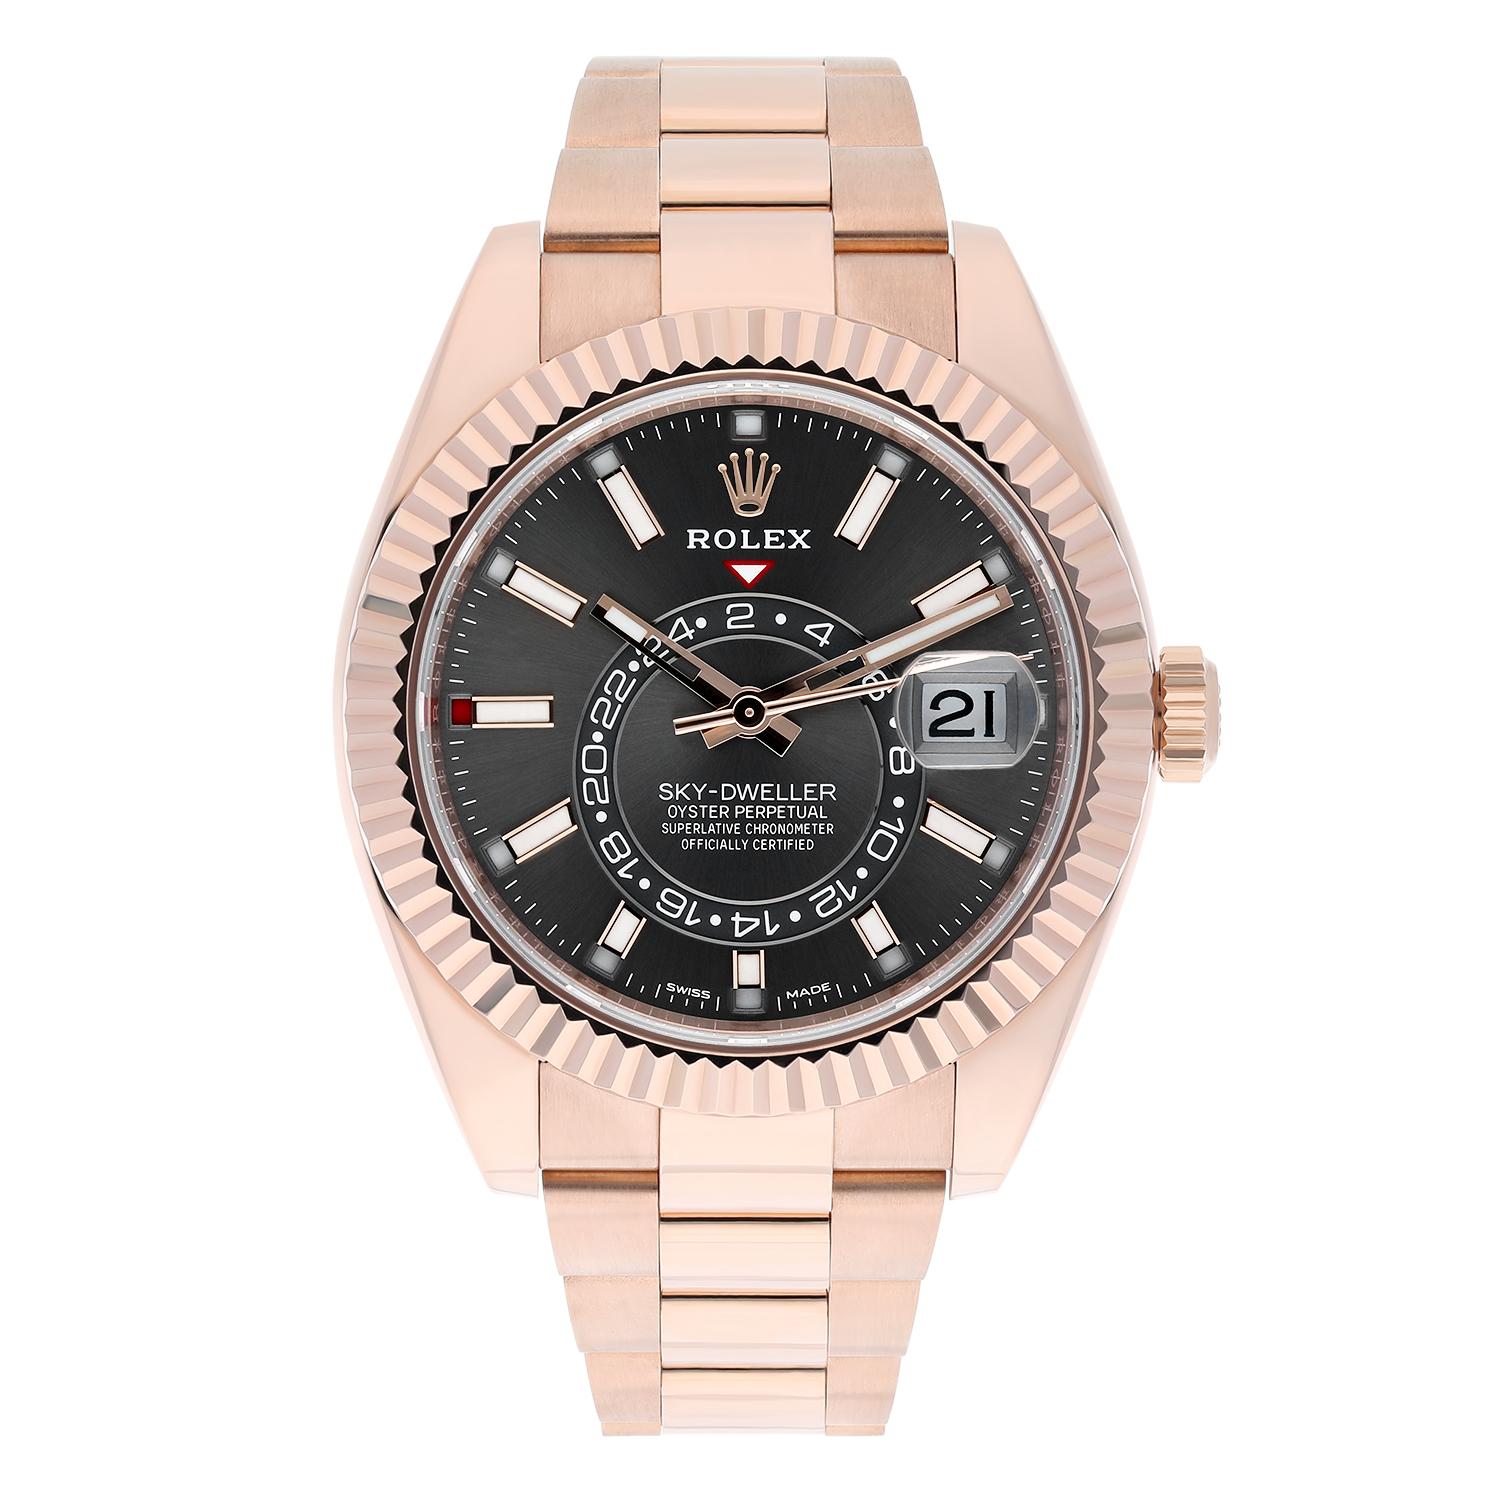 This stunning Rolex Sky-Dweller 42mm watch features a rose gold case, bracelet and a bidirectional rotating fluted bezel. The rhodium dial with stick indexes and sunburst pattern adds a touch of elegance to this luxurious timepiece. With a variety